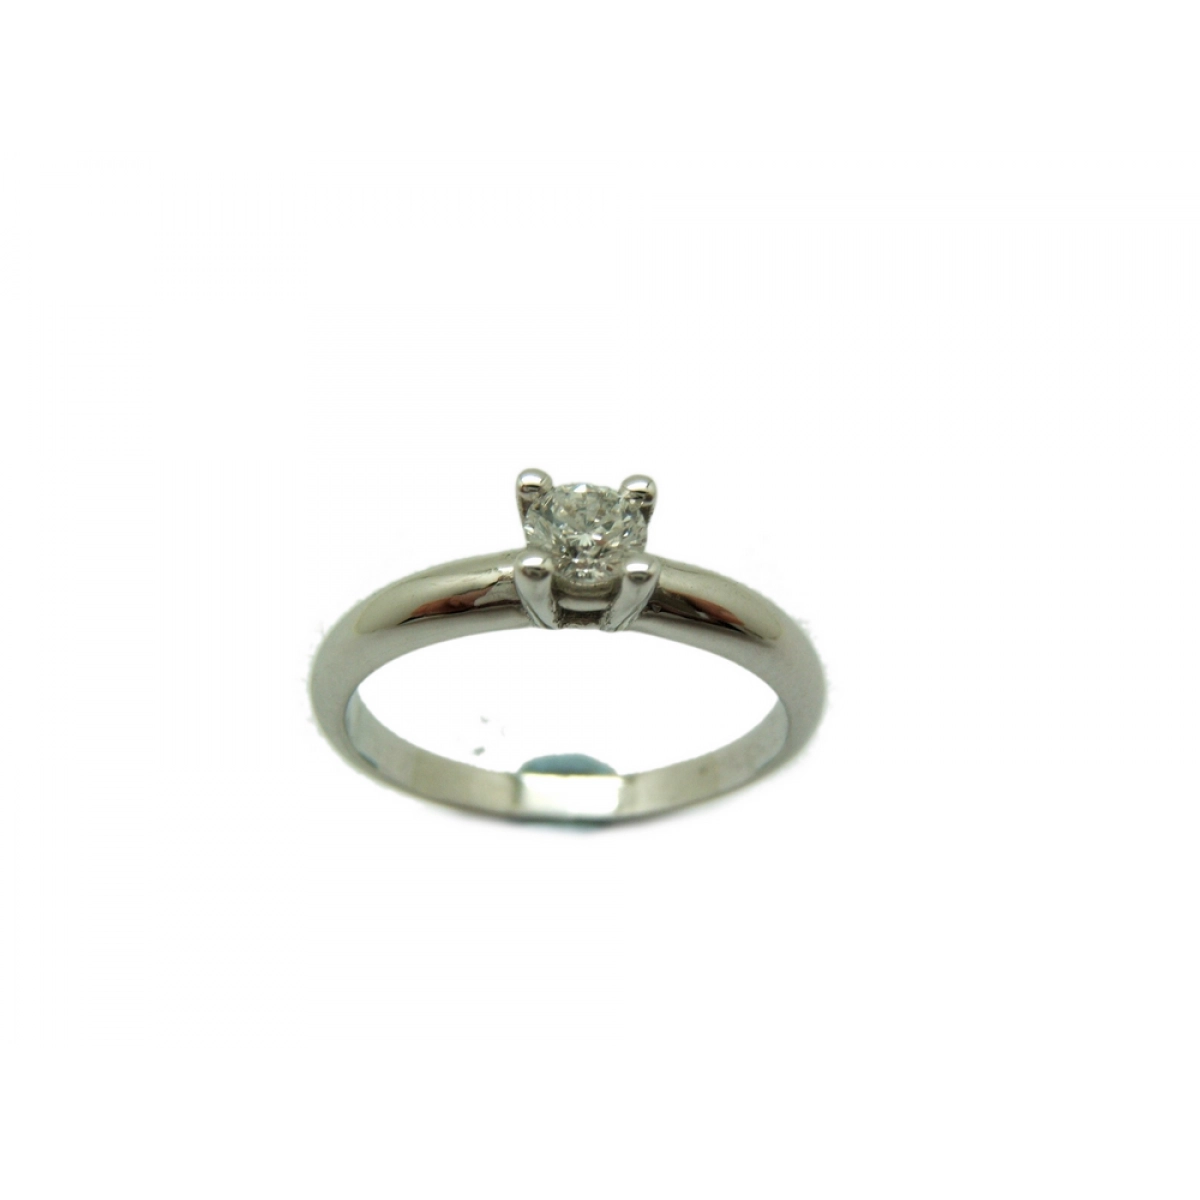 RING SOLITAIRE WHITE GOLD WITH DIAMOND A-359 B-79